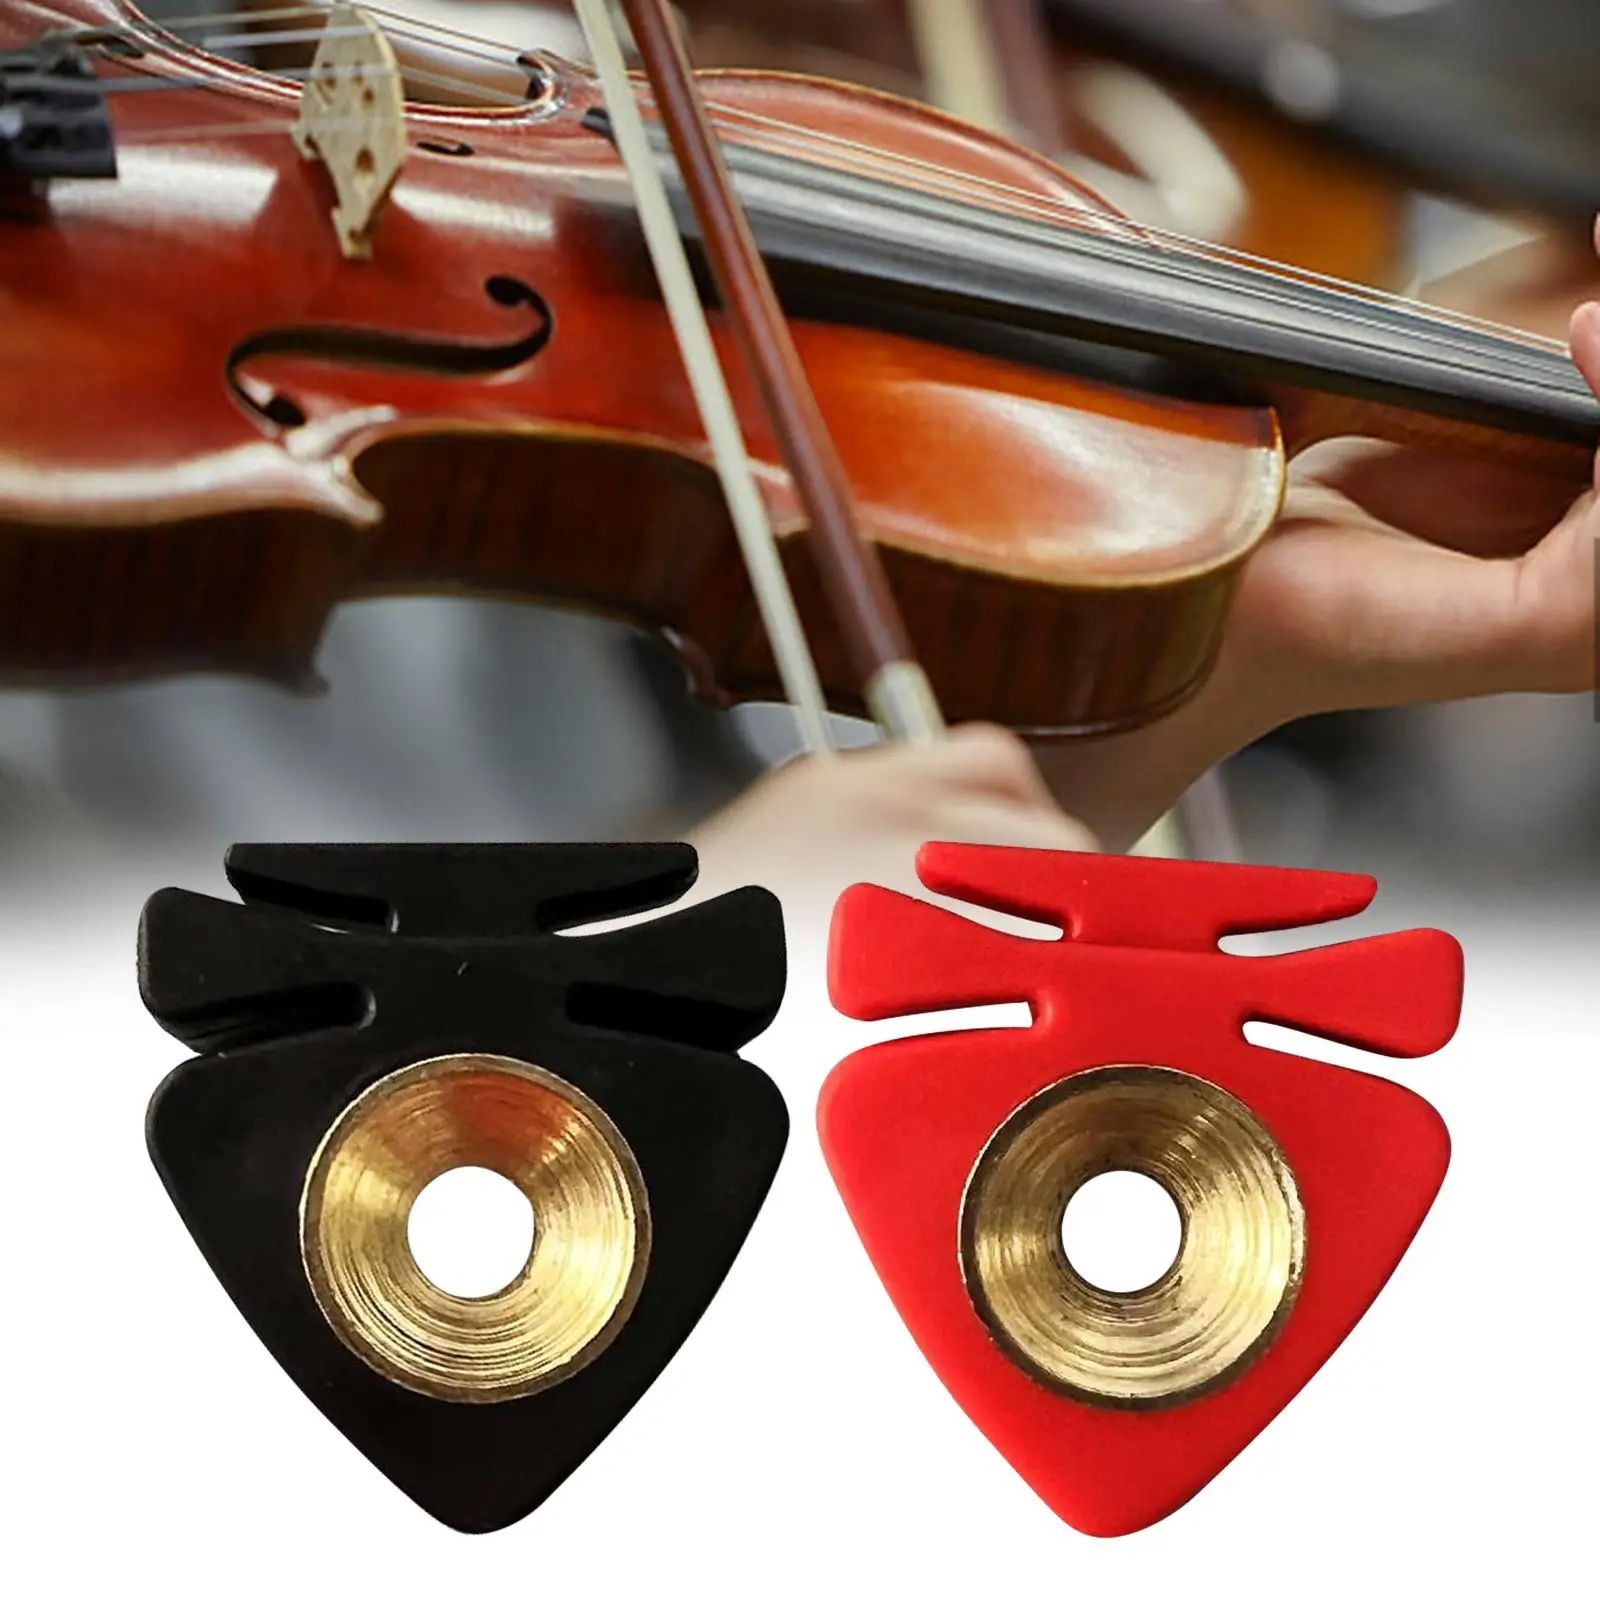 Violin Mute Accessories Components Simple Installation Portable Lower Noise Tool String Dampener for Practice Musical Instrument